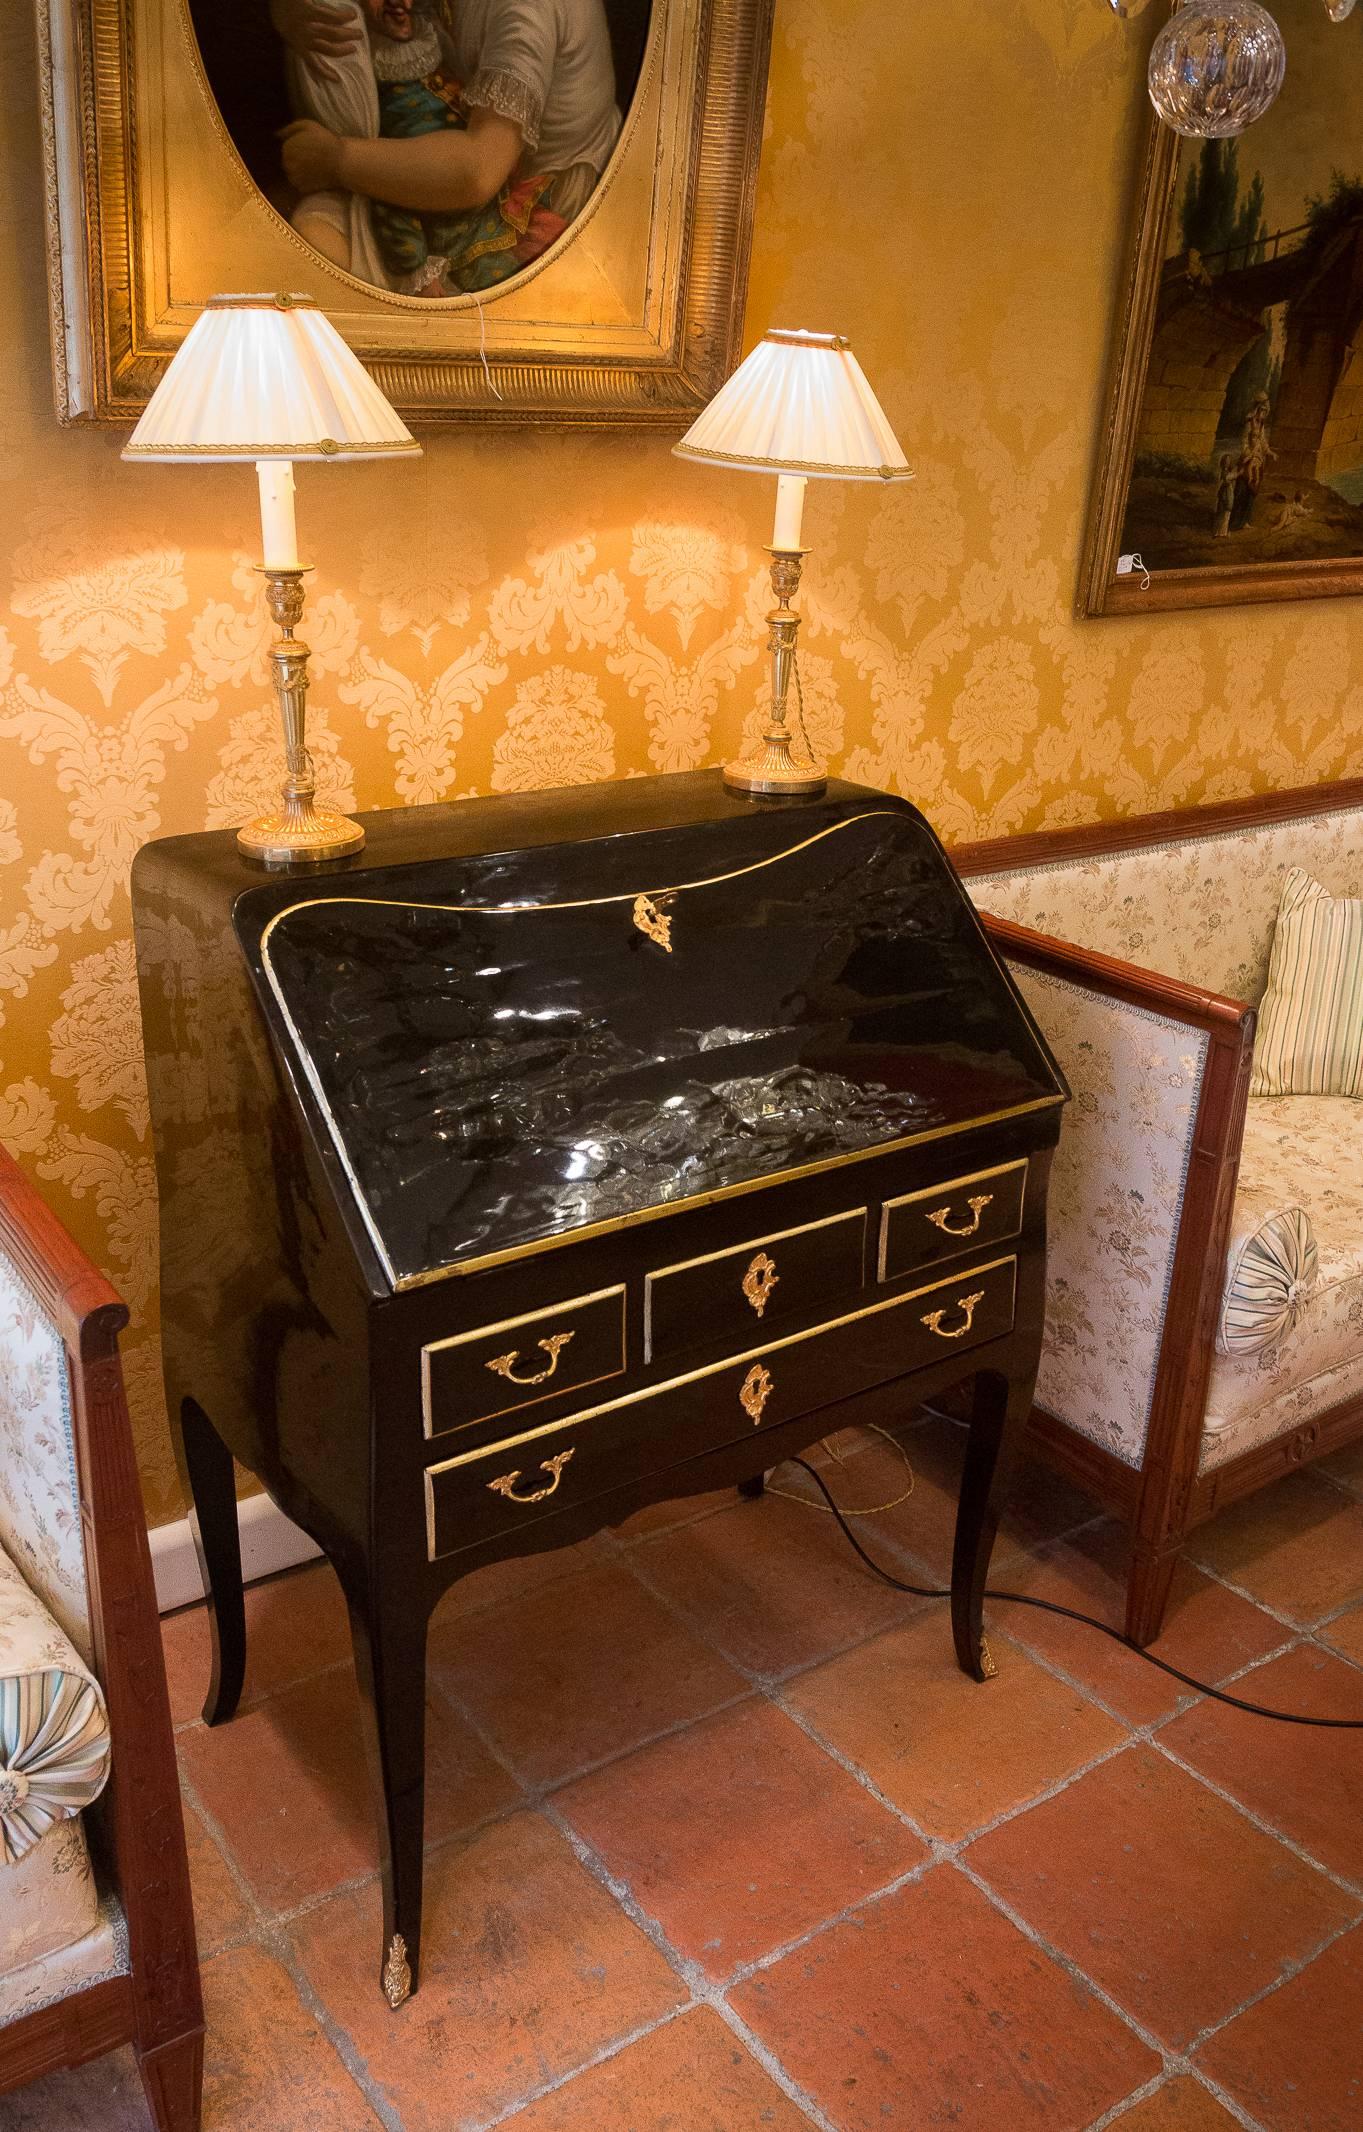 We are pleased to present you, a gorgeous French Regence period black lacquered slant-top desk. 

Our desk has a lovely interior which includes a stepped interior with six drawers, a secret compartment, and a beautiful tooled leather writing